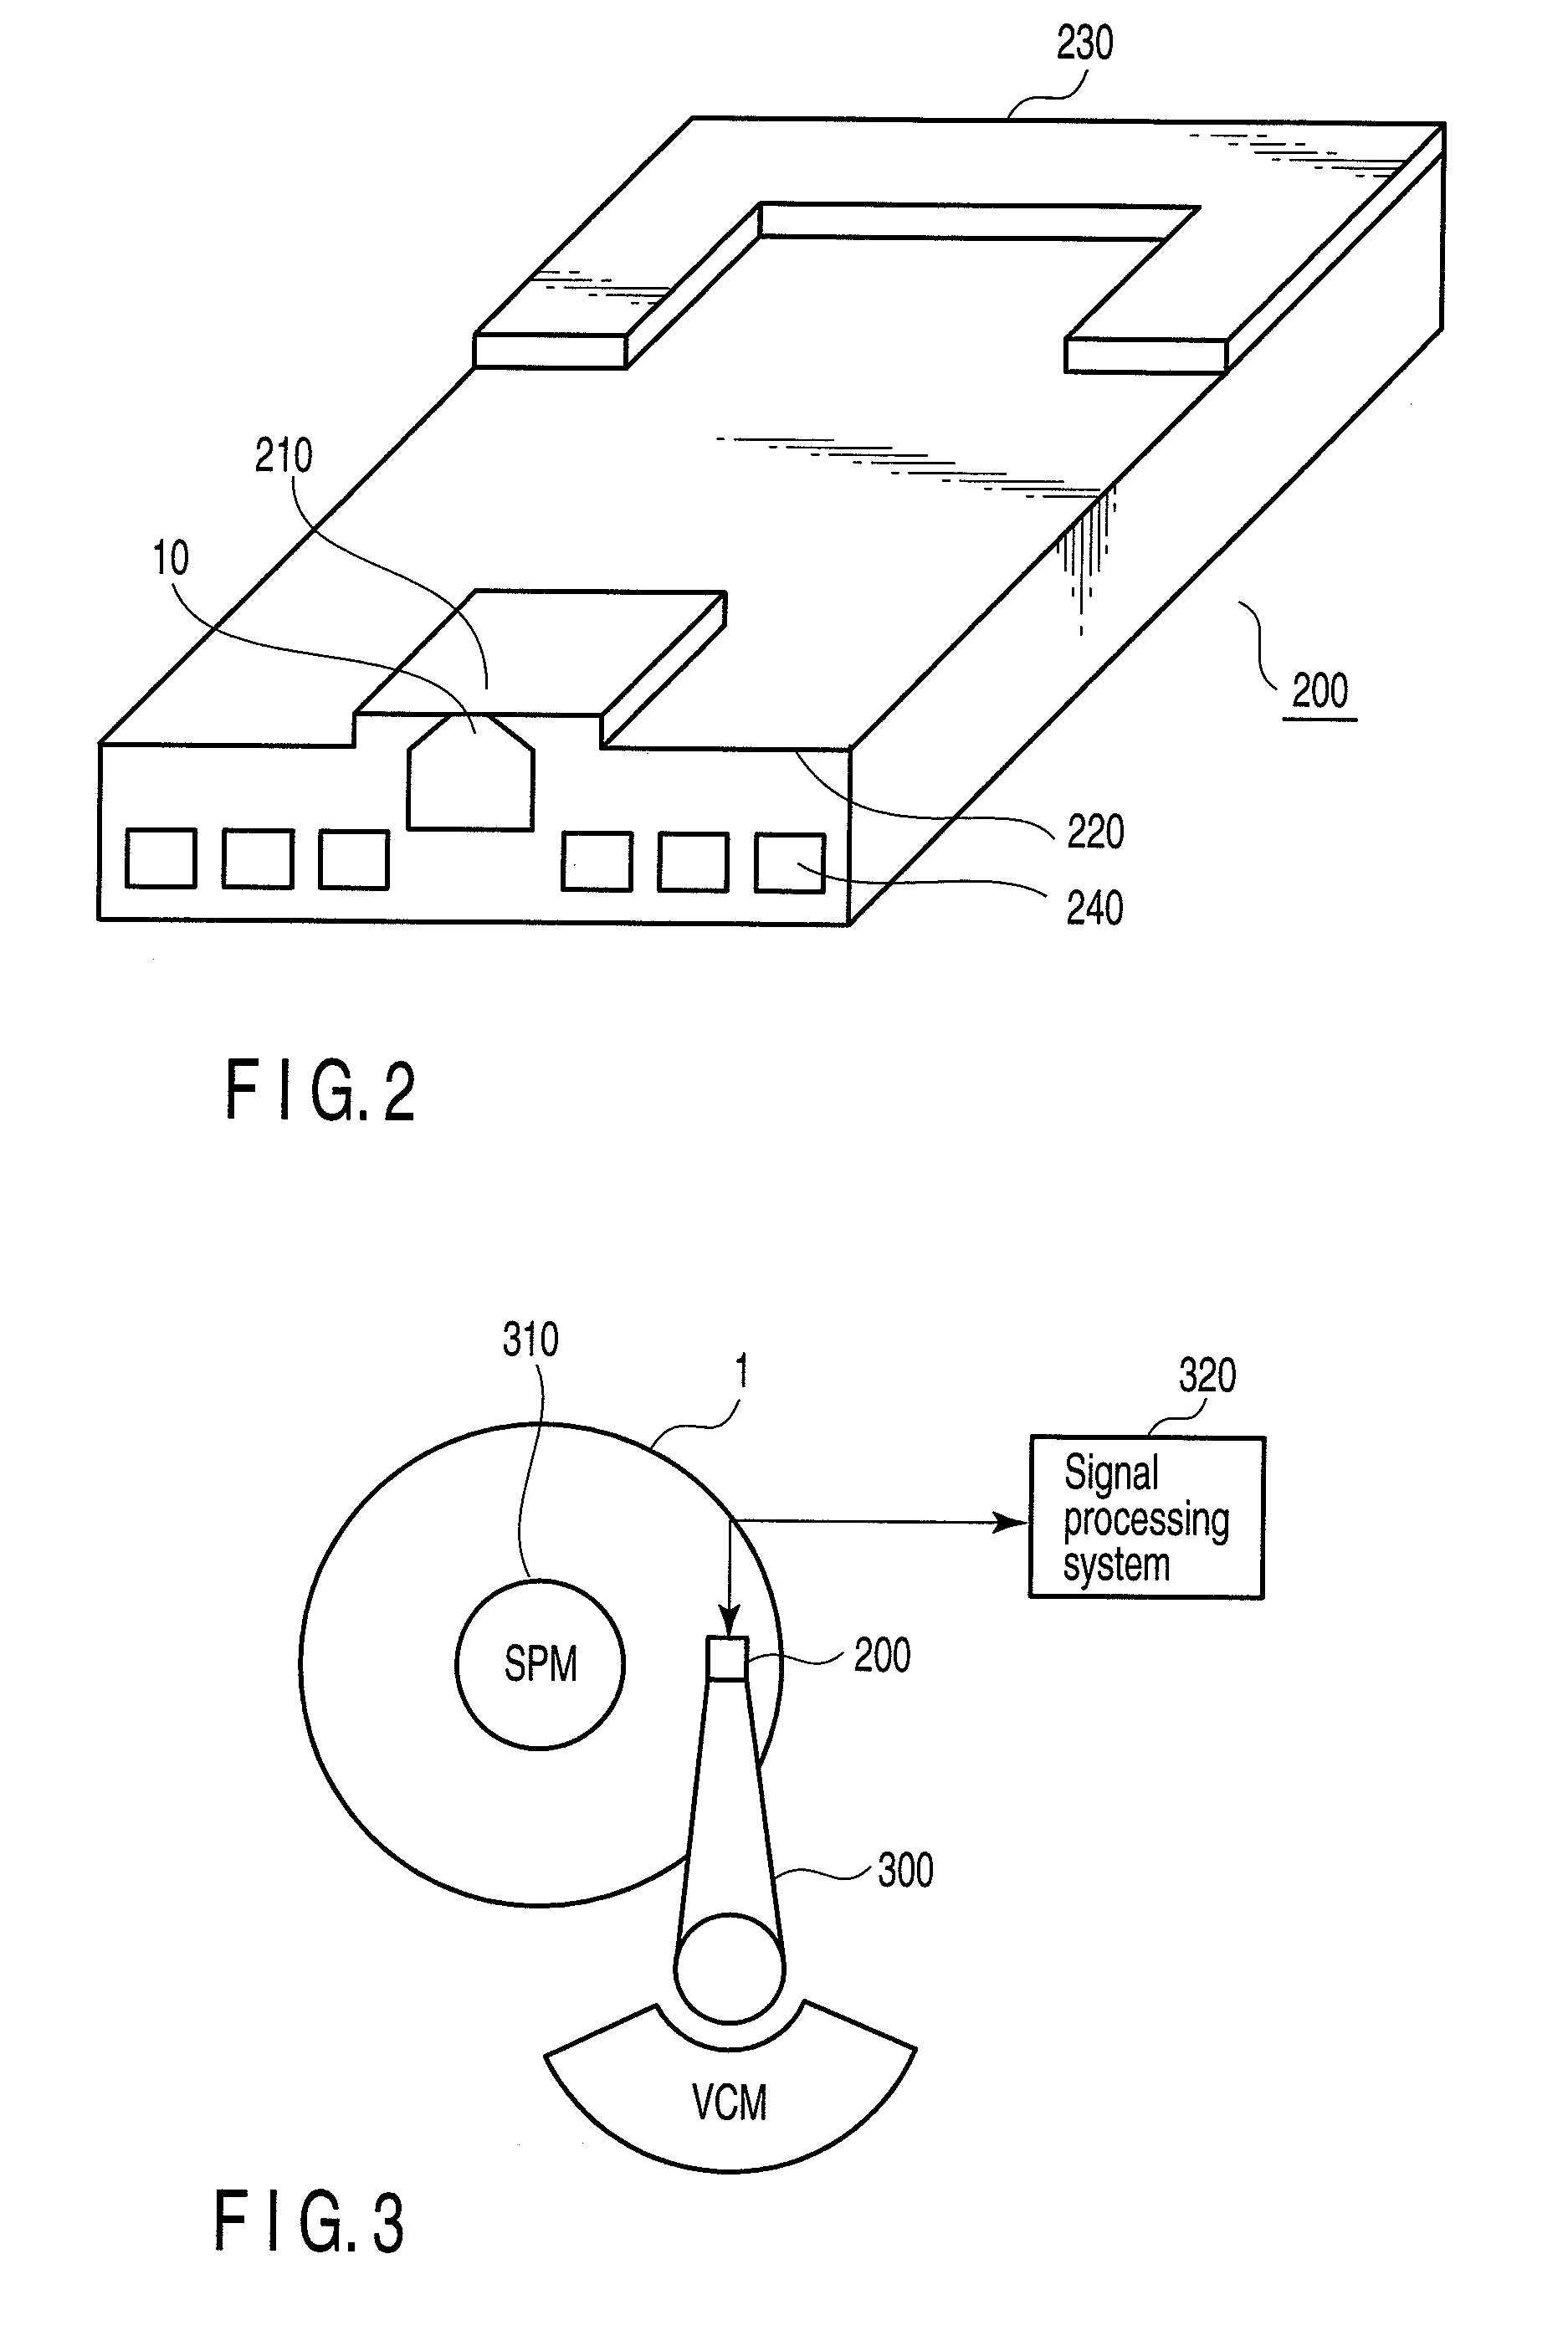 Apparatus for assisting write operation using high frequency magnetic field in disk drive